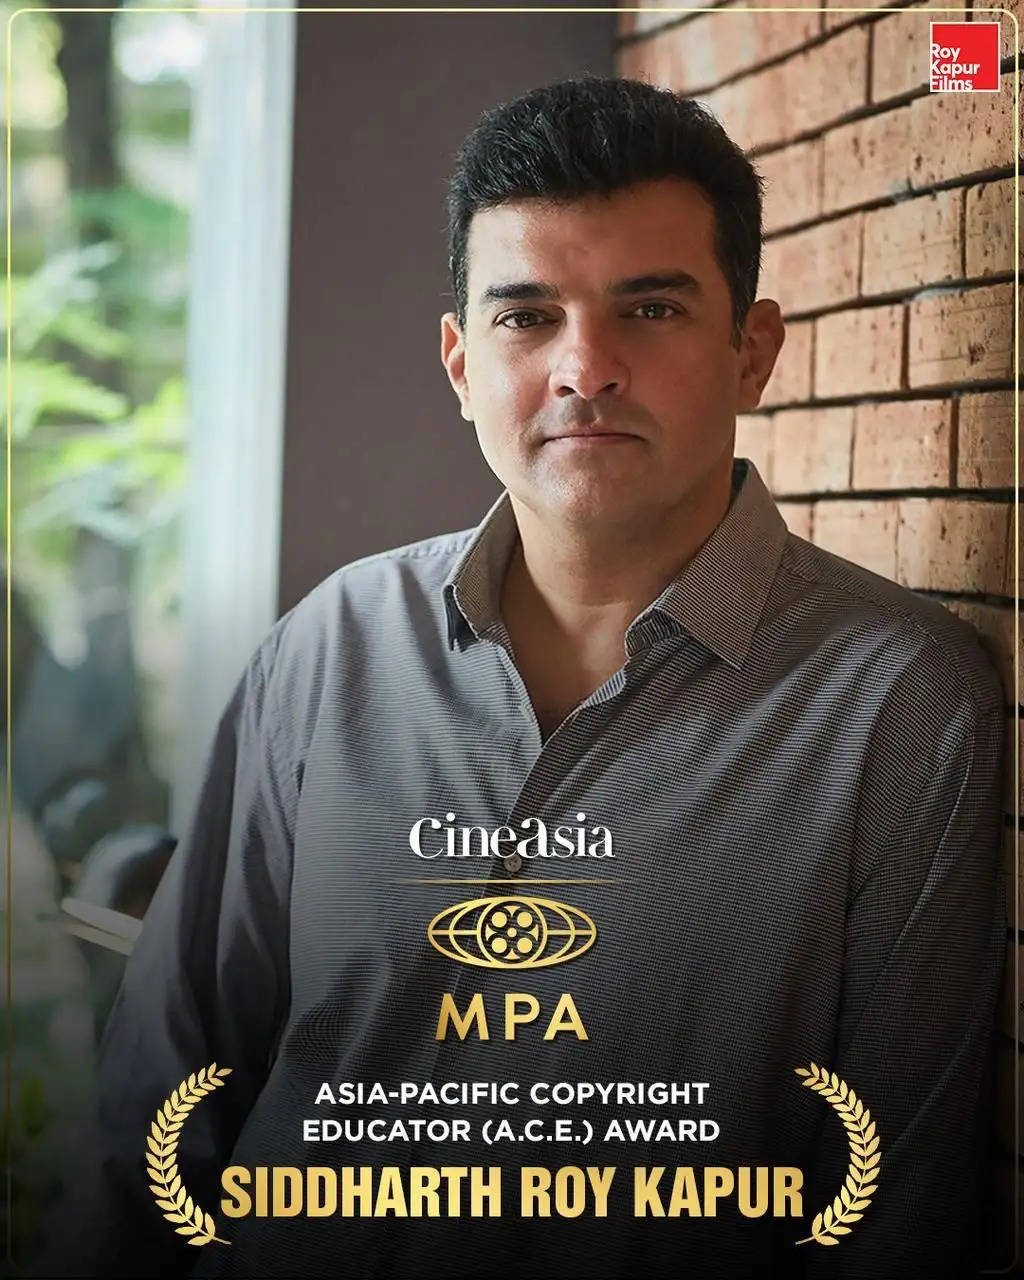 Siddharth Roy Kapur awarded top industry honour by Motion Picture Association